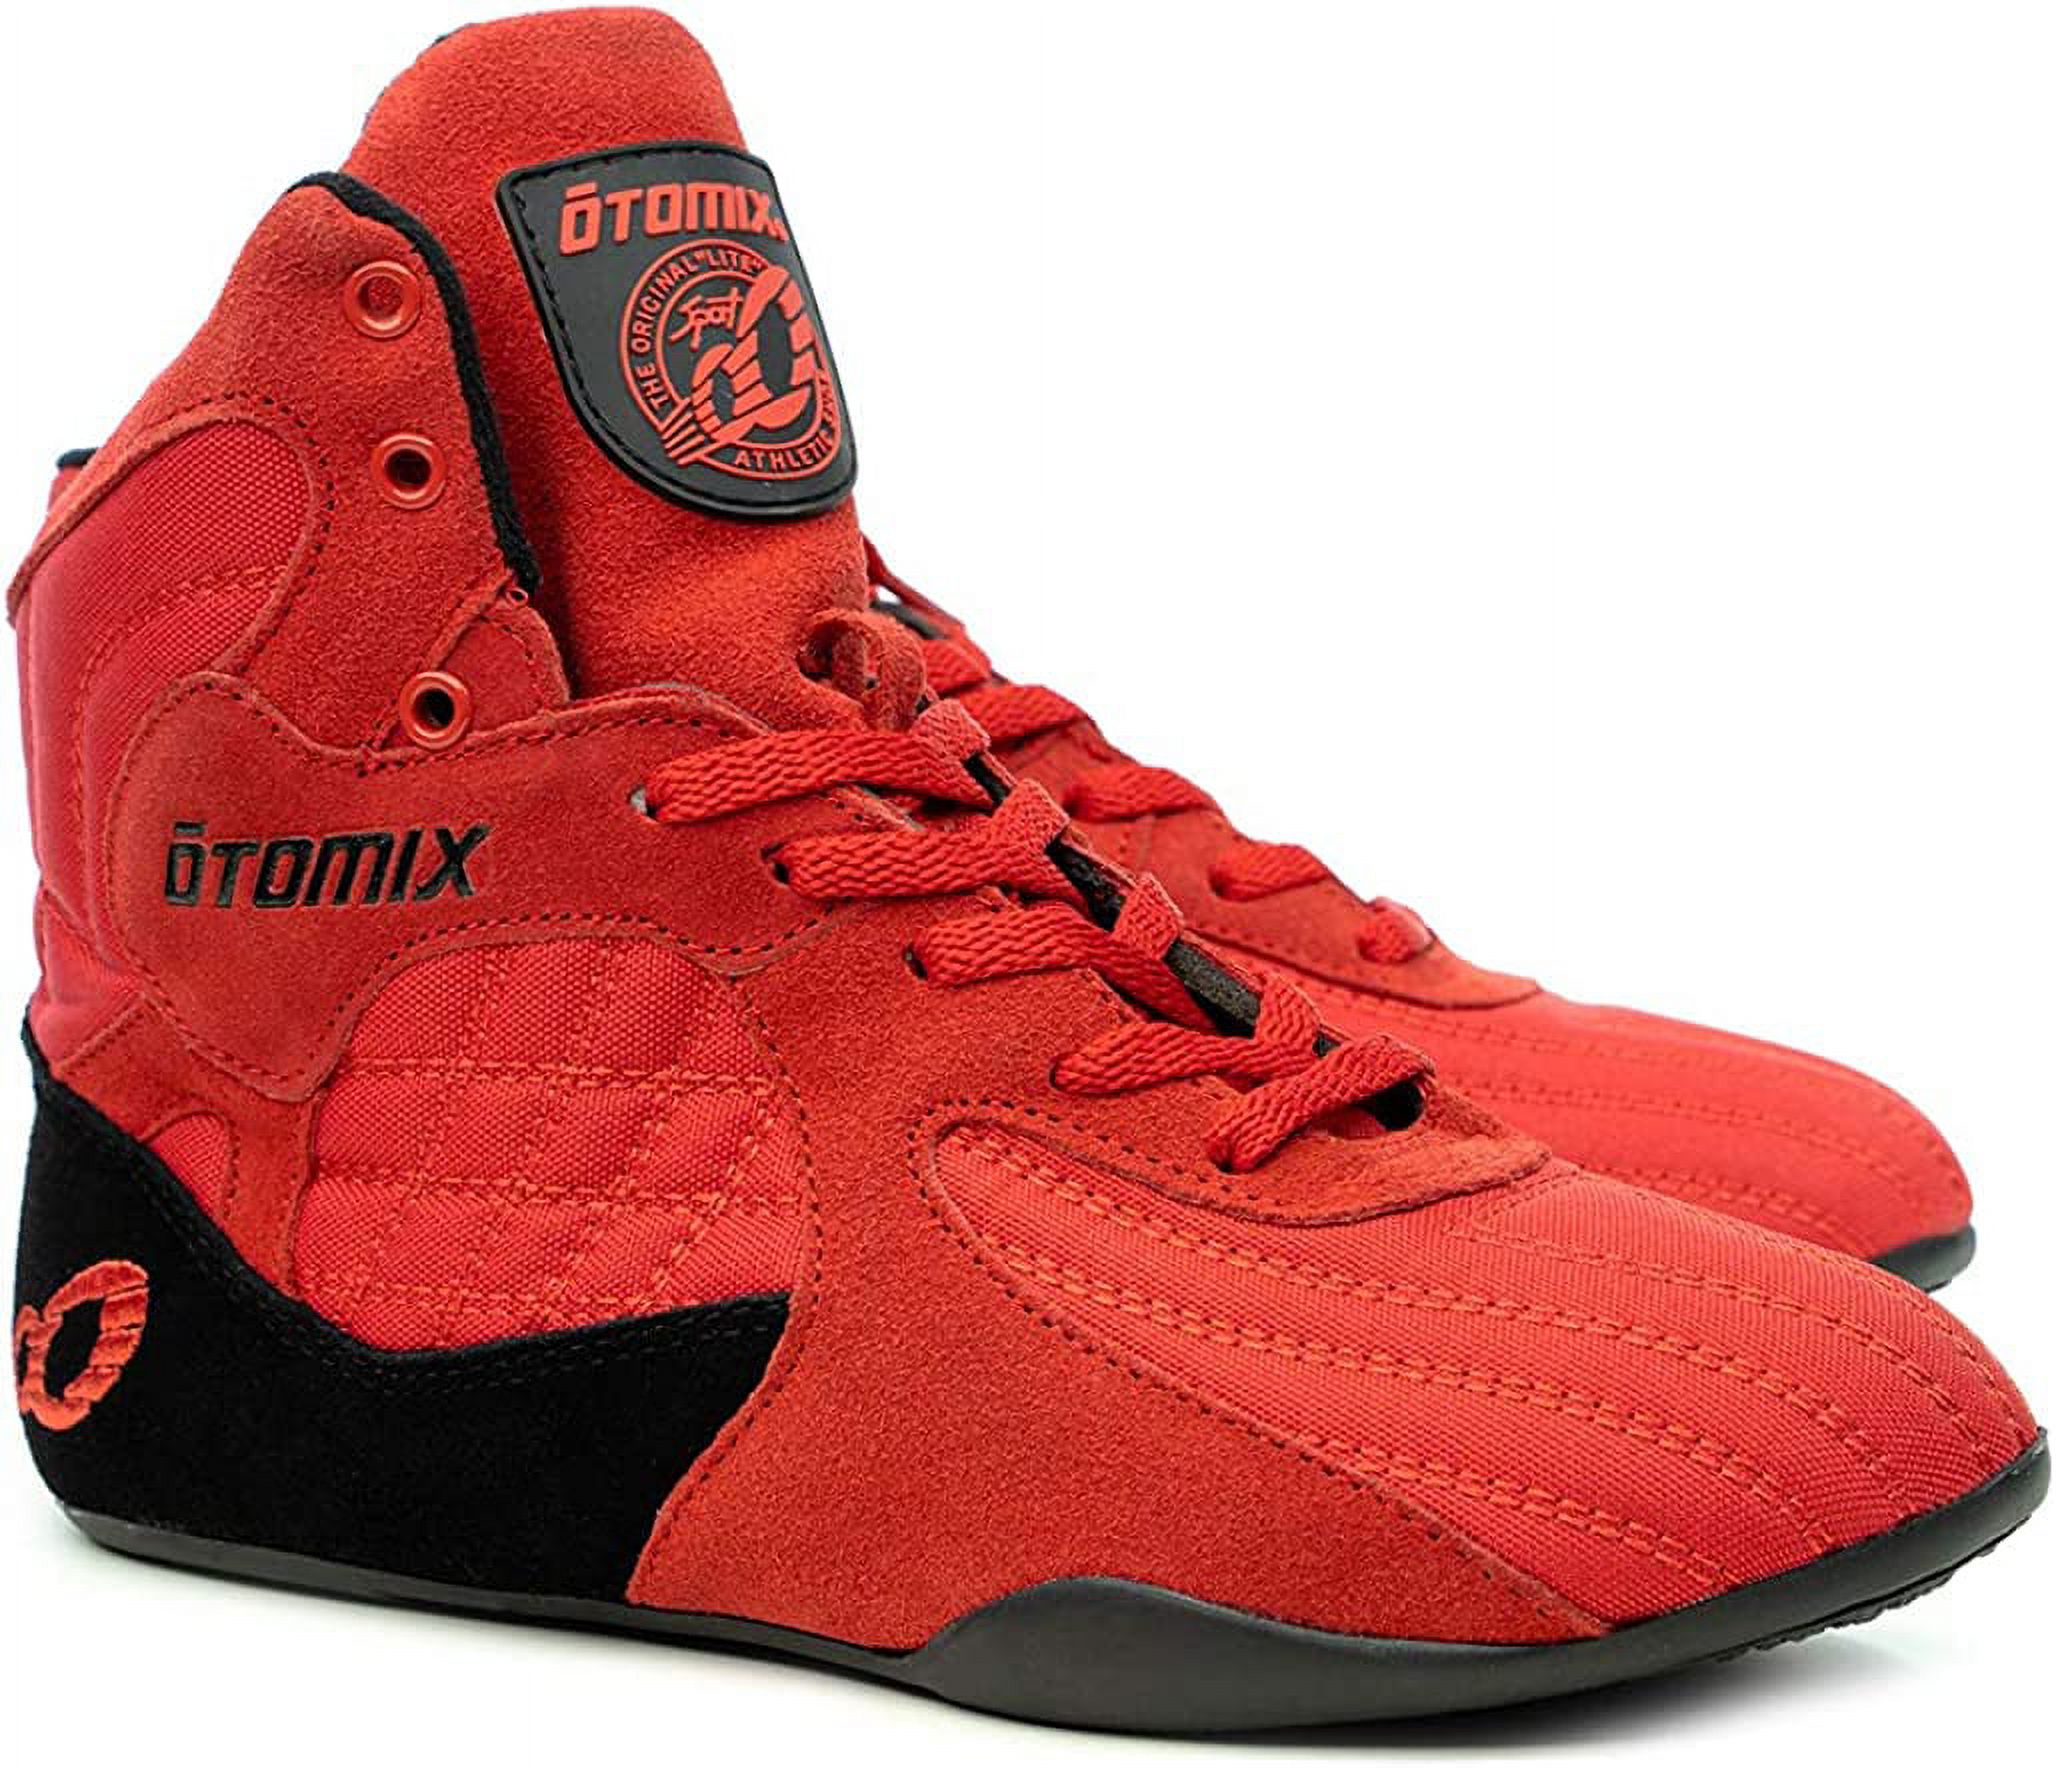 Otomix Red Stingray Escape Weightlifting & Grappling Shoe (Size 7.5) - image 3 of 5